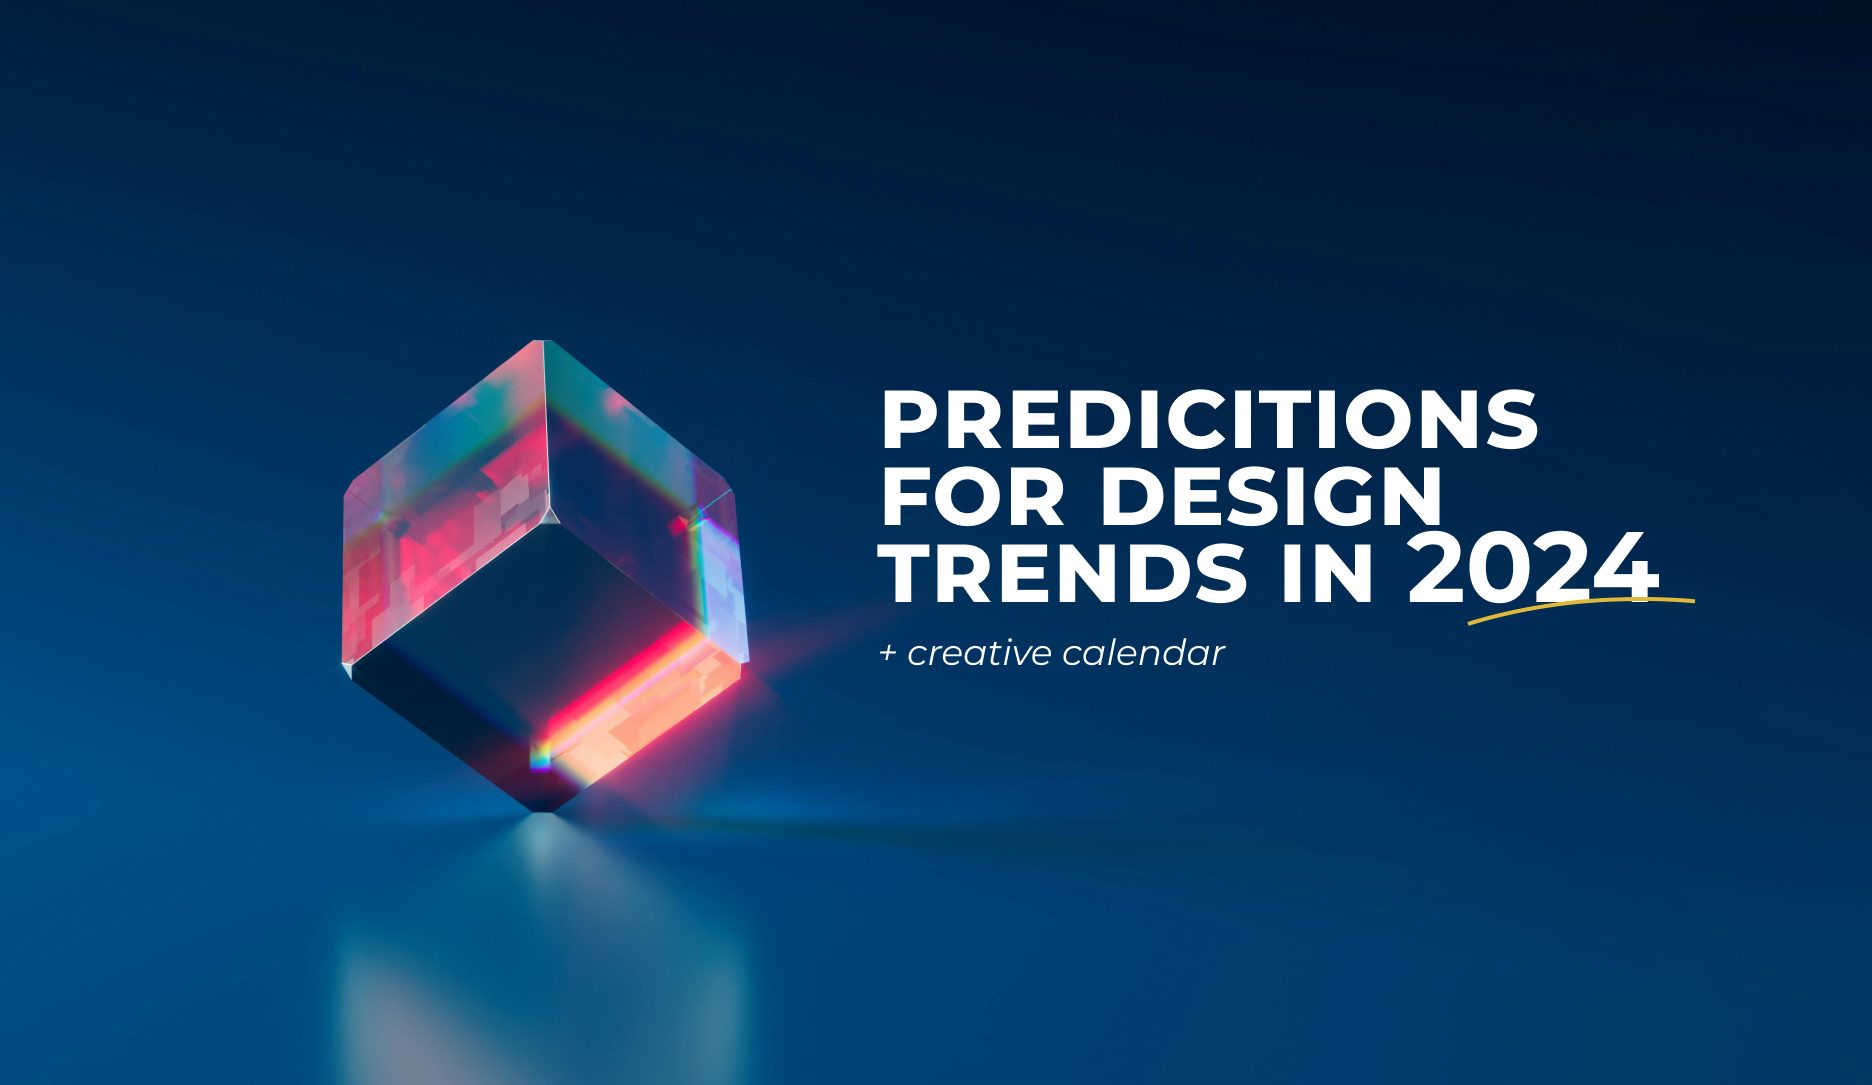 Predoctions For Design Trends In 2024